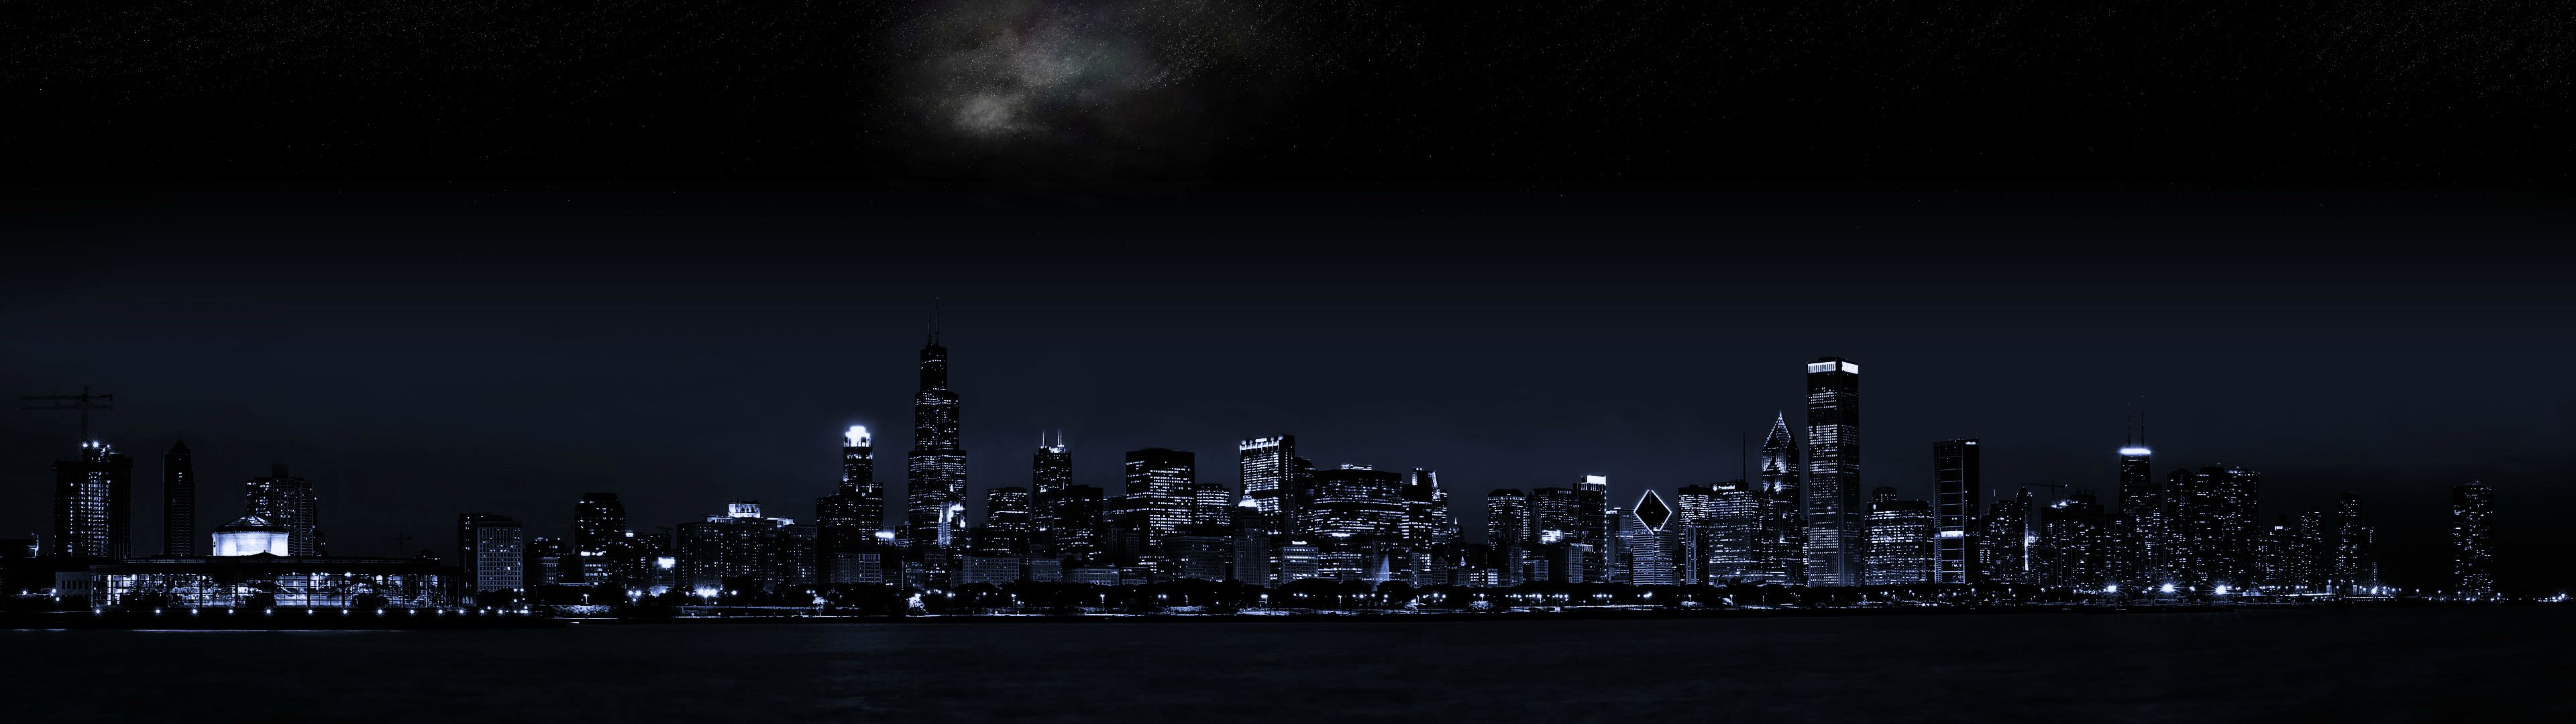 5760 X 1080 City Wallpapers